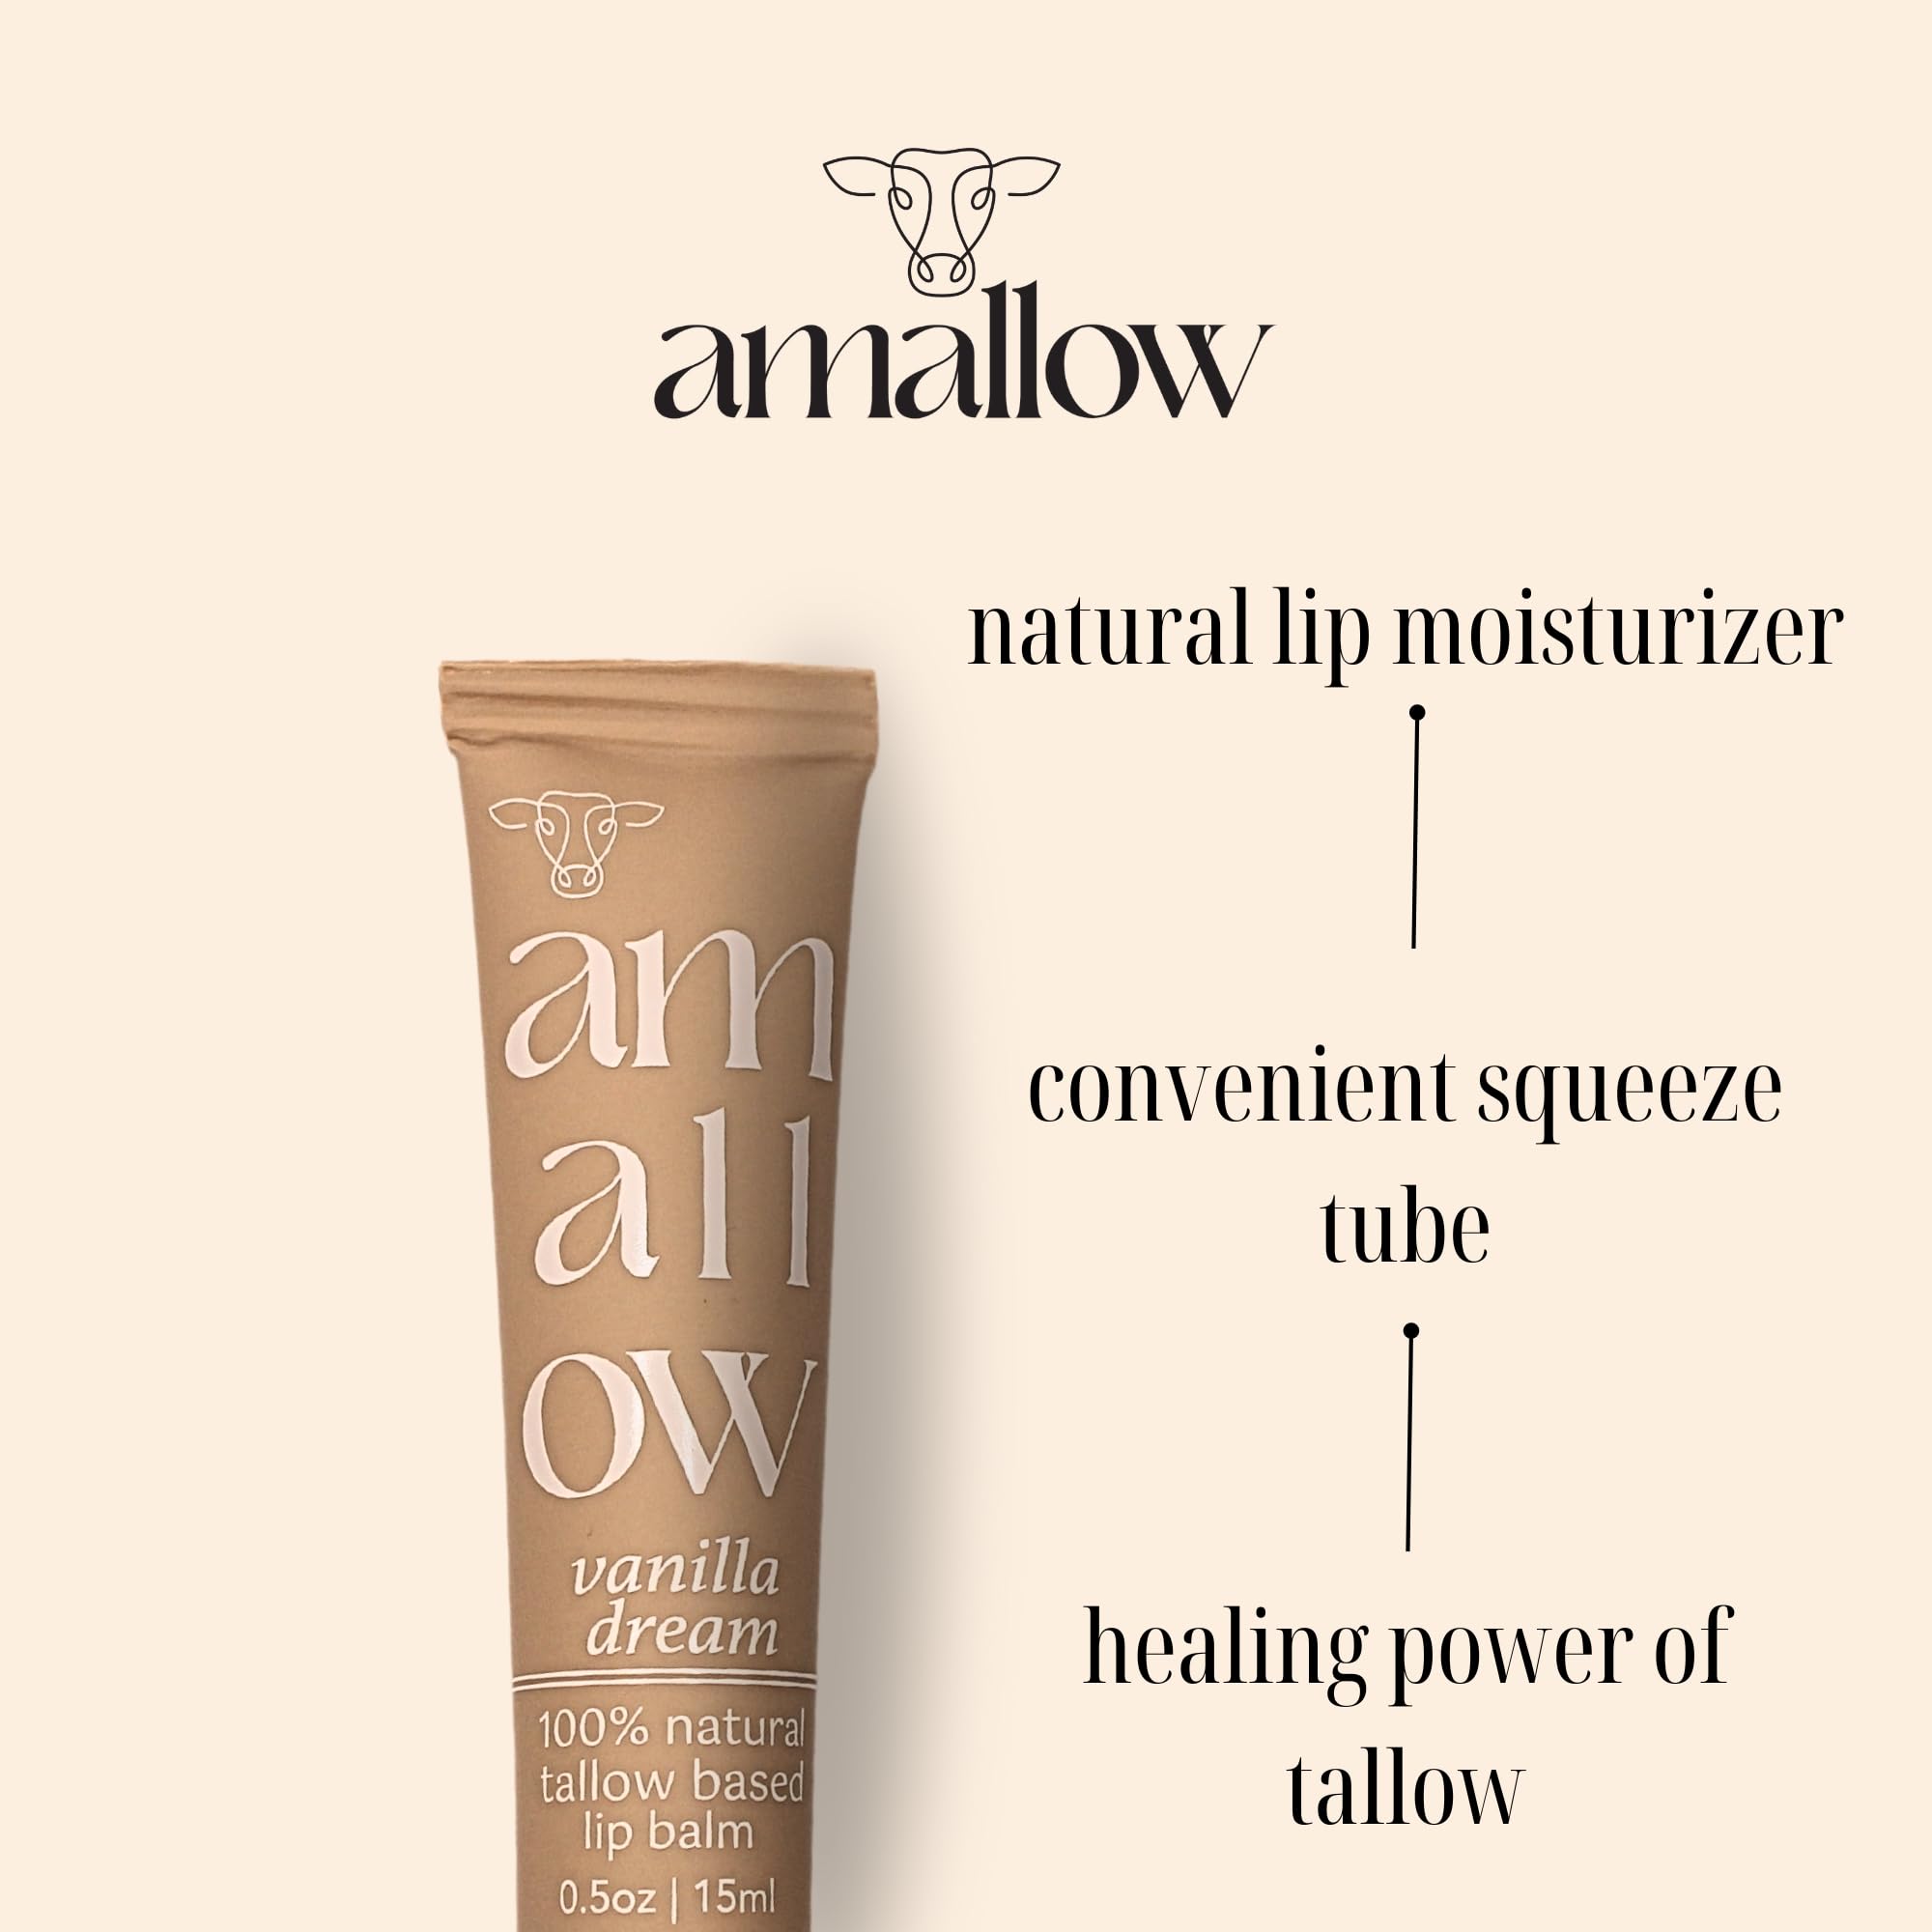 Amallow All Natural Tallow Lip Balm Squeezable Tube - Grass Fed/Finished Beef Tallow + Organic Beeswax & Vanilla Essential Oil .5 OZ (Vanilla Dream)